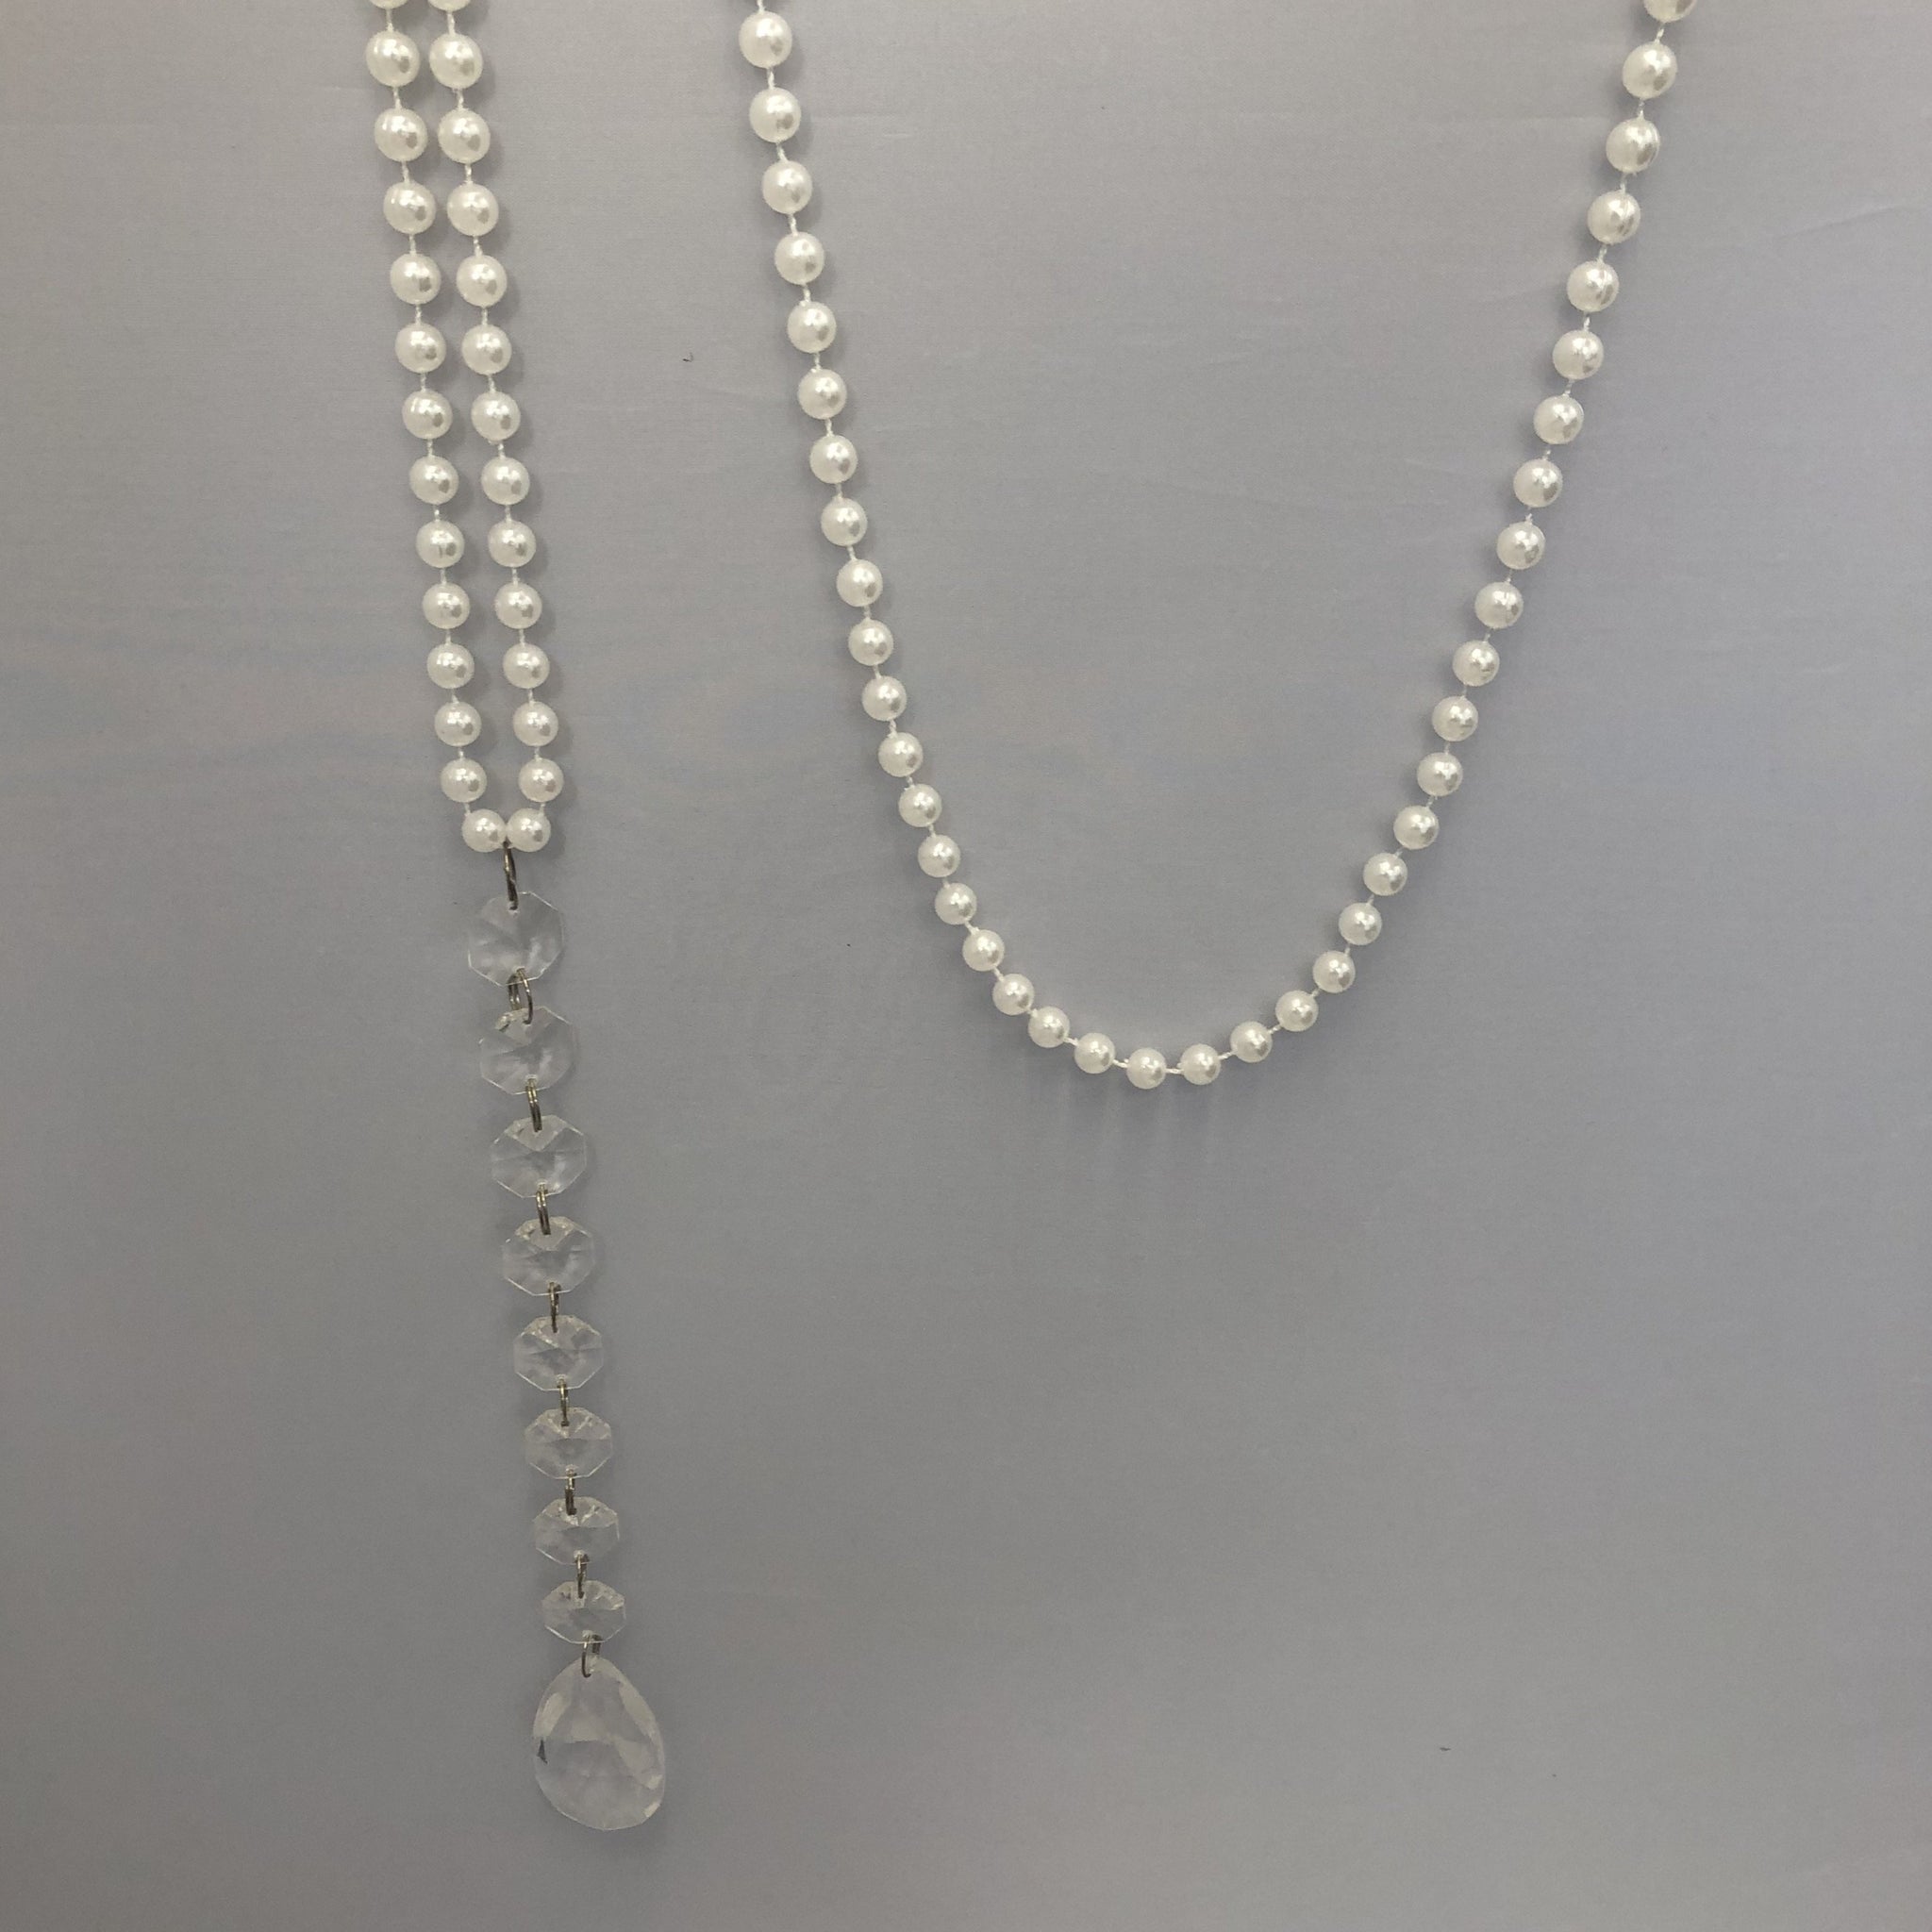 Pearl strand with diamante ends - Wellington Wedding Hire